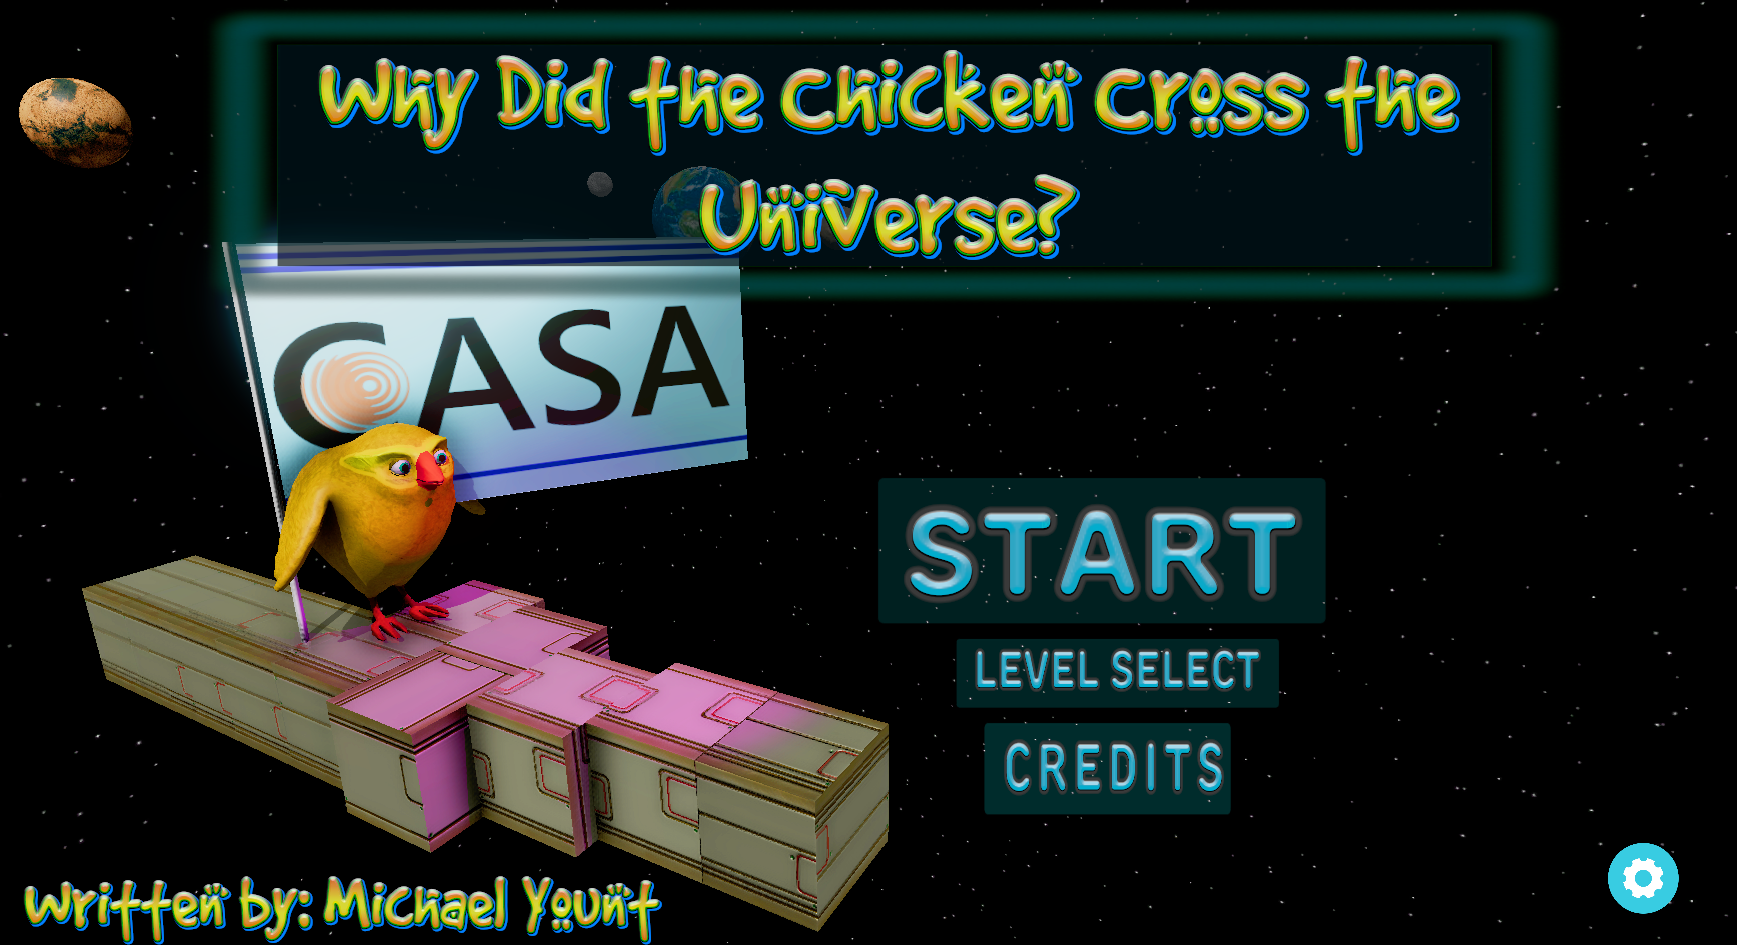 Why Did the Chicken Cross the Universe?